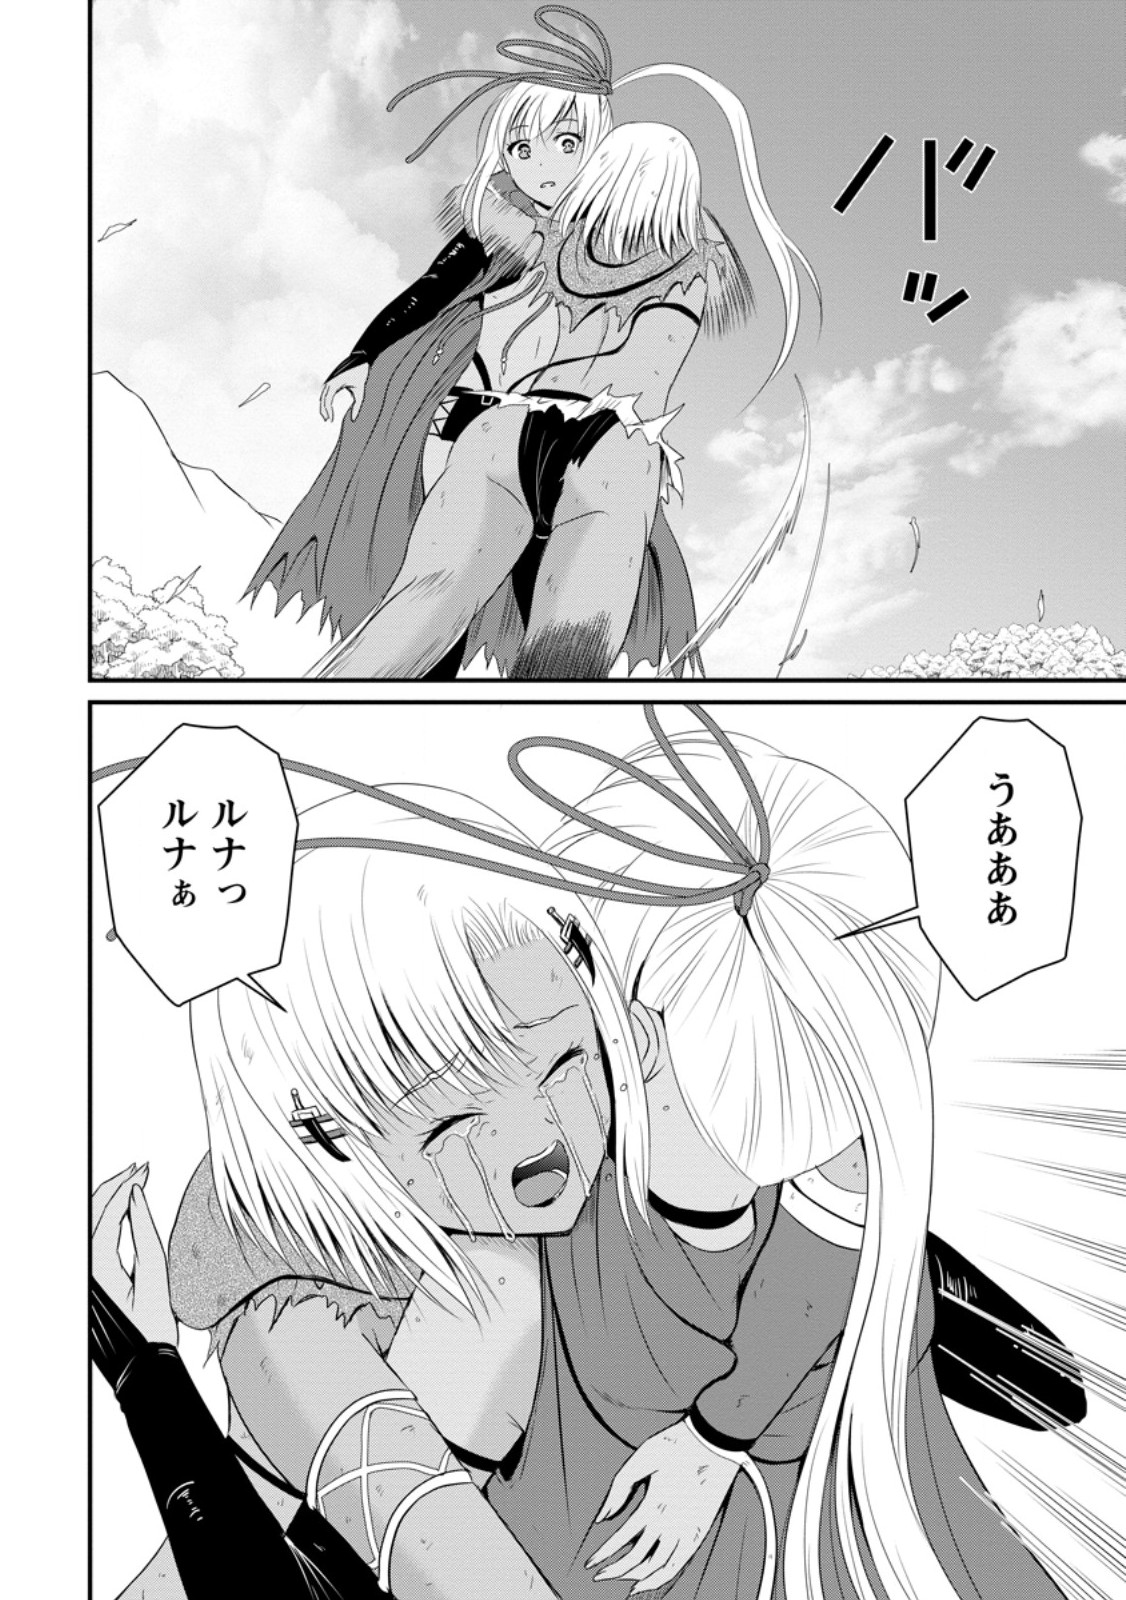 The Frontier Life of The Low-Class Ossan Healer And The Lovery Girl - Chapter 47.2 - Page 2